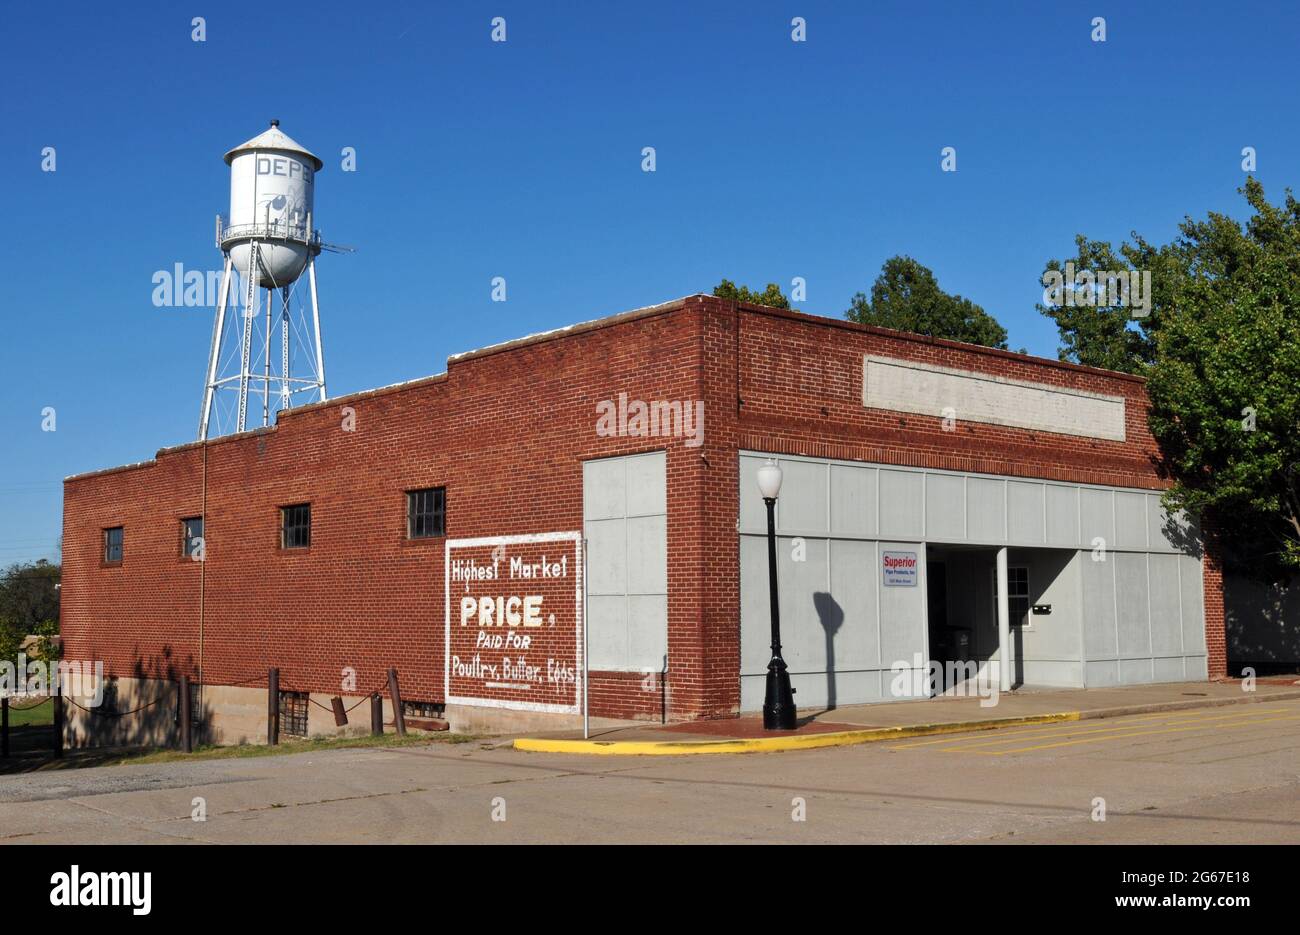 An old-fashioned water tower rises above a brick commercial building on Main Street in the Route 66 town of Depew, Oklahoma. Stock Photo